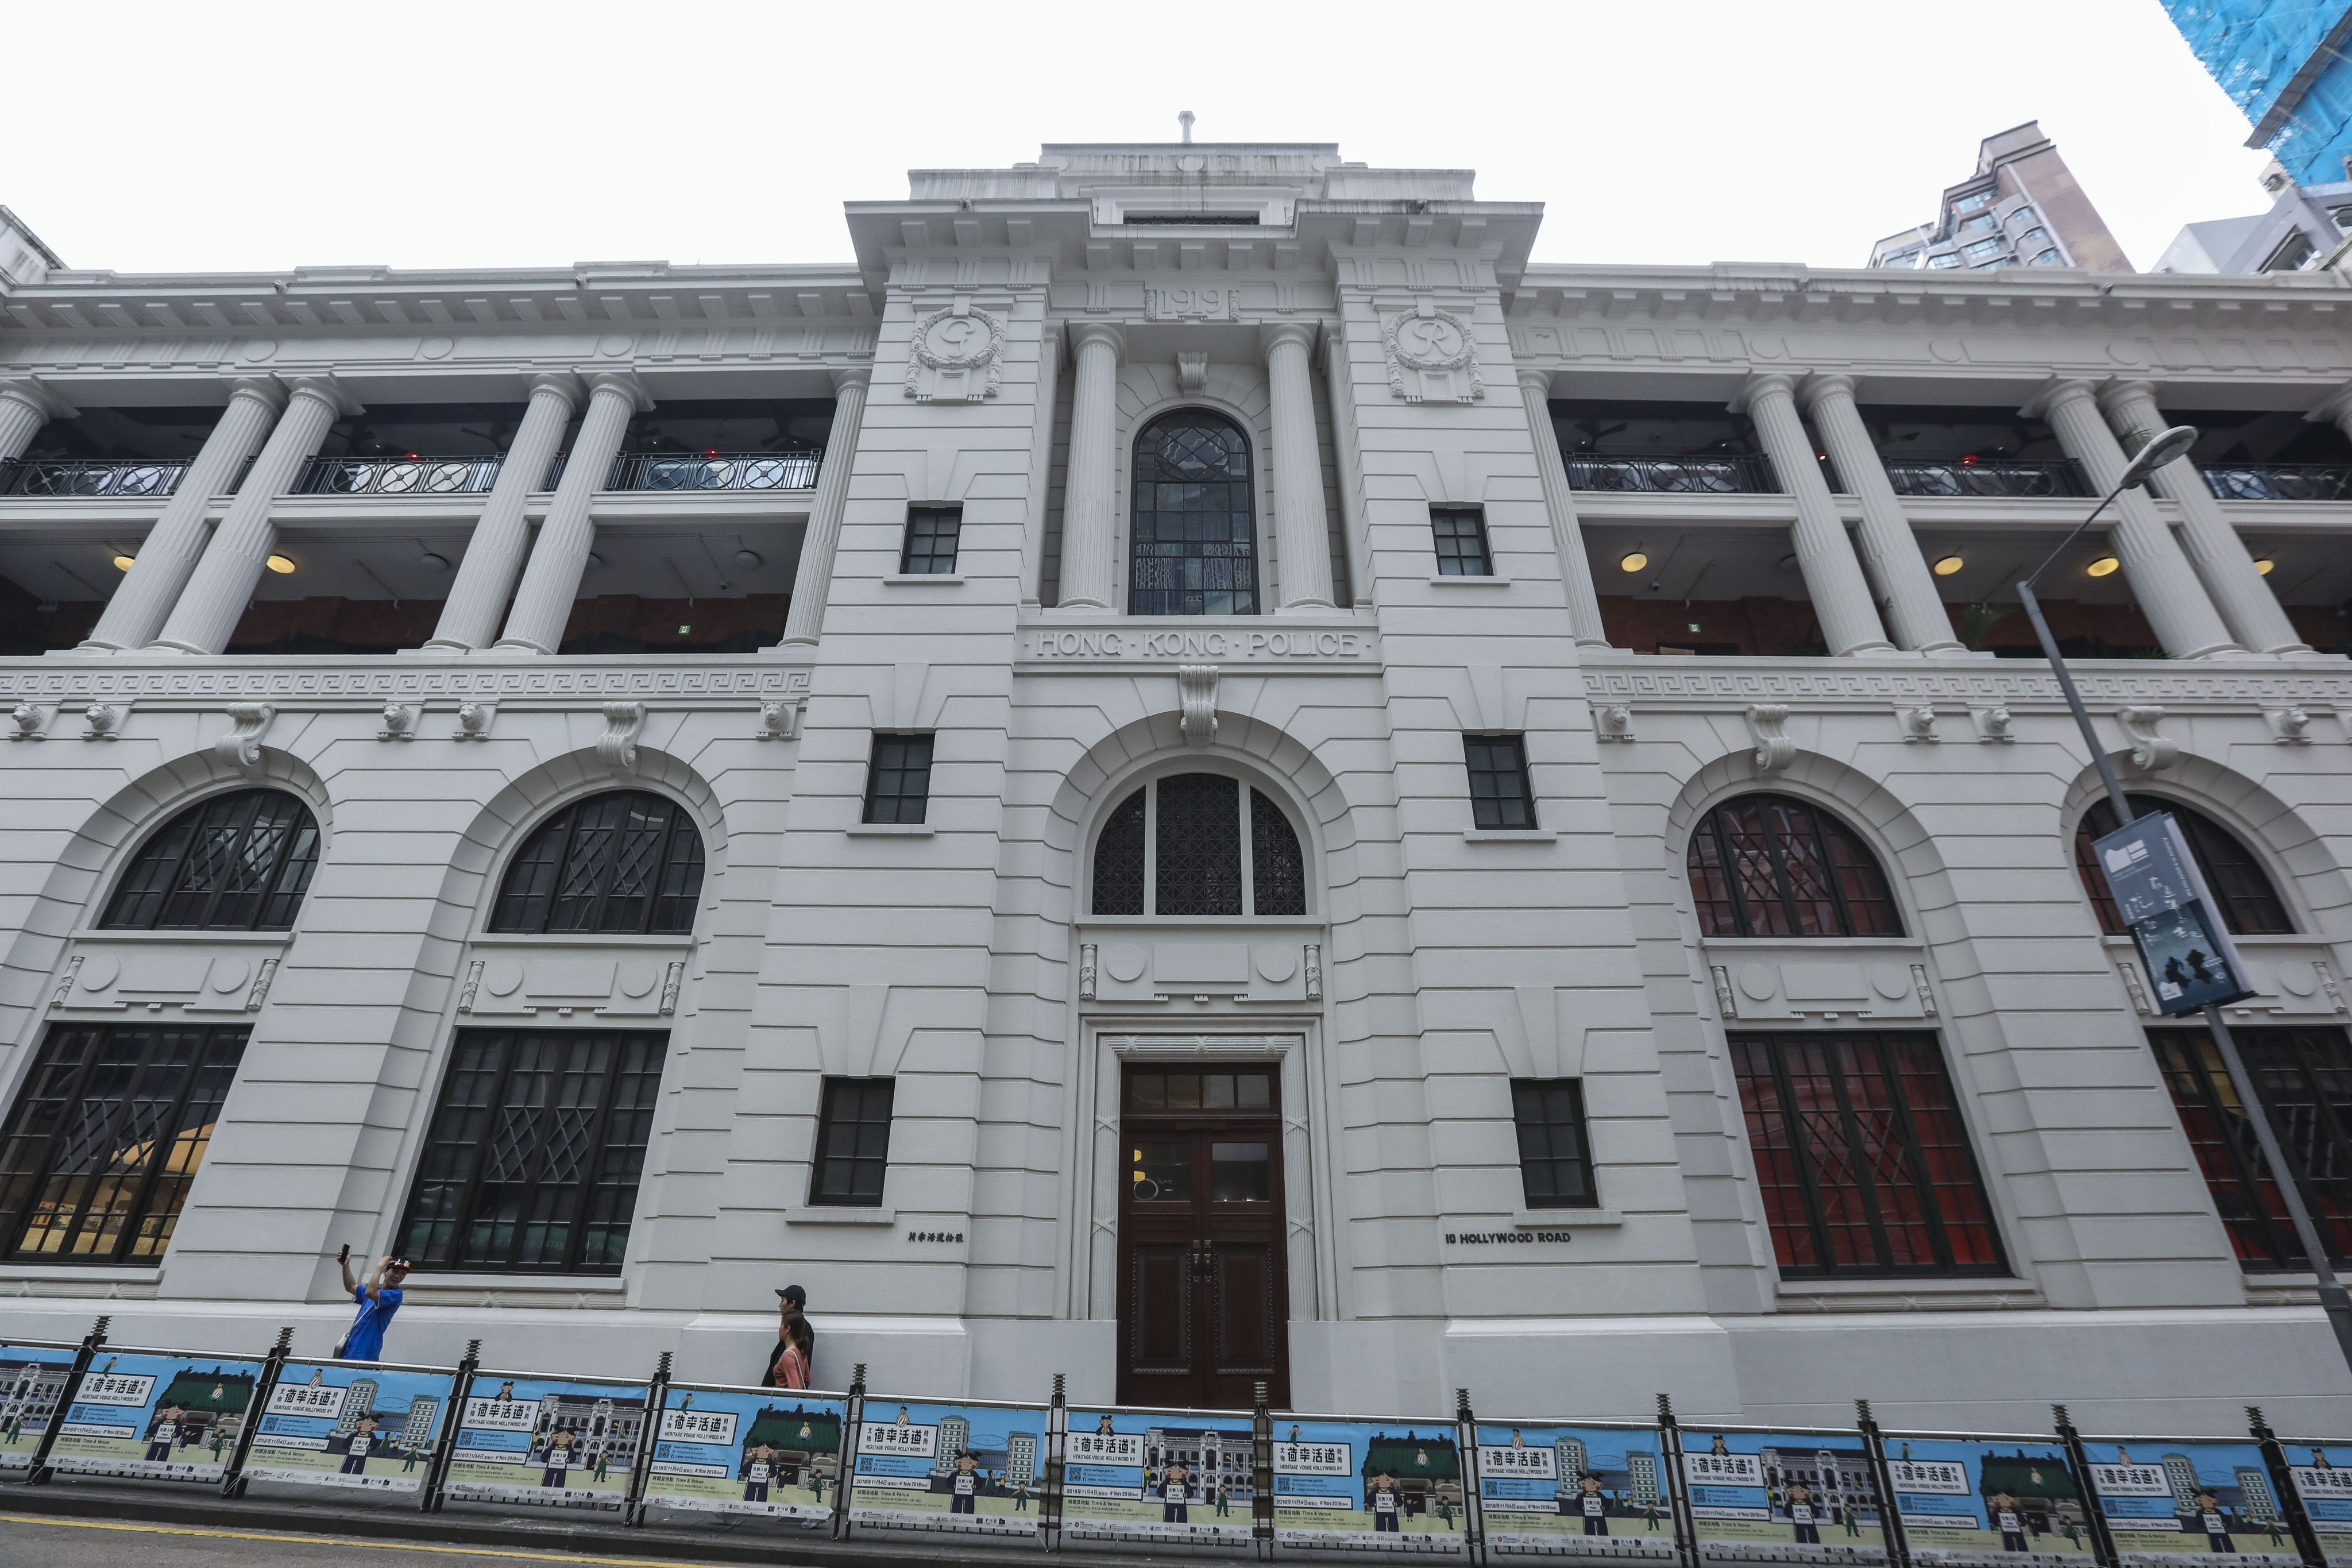 Part of the Tai Kwun heritage and arts centre in Hong Kong, which occupies the former Central Police Station and Victoria Prison. Hong Kong should conserve its remaining historic buildings, writes Cliff Buddle. Photo: Nora Tam